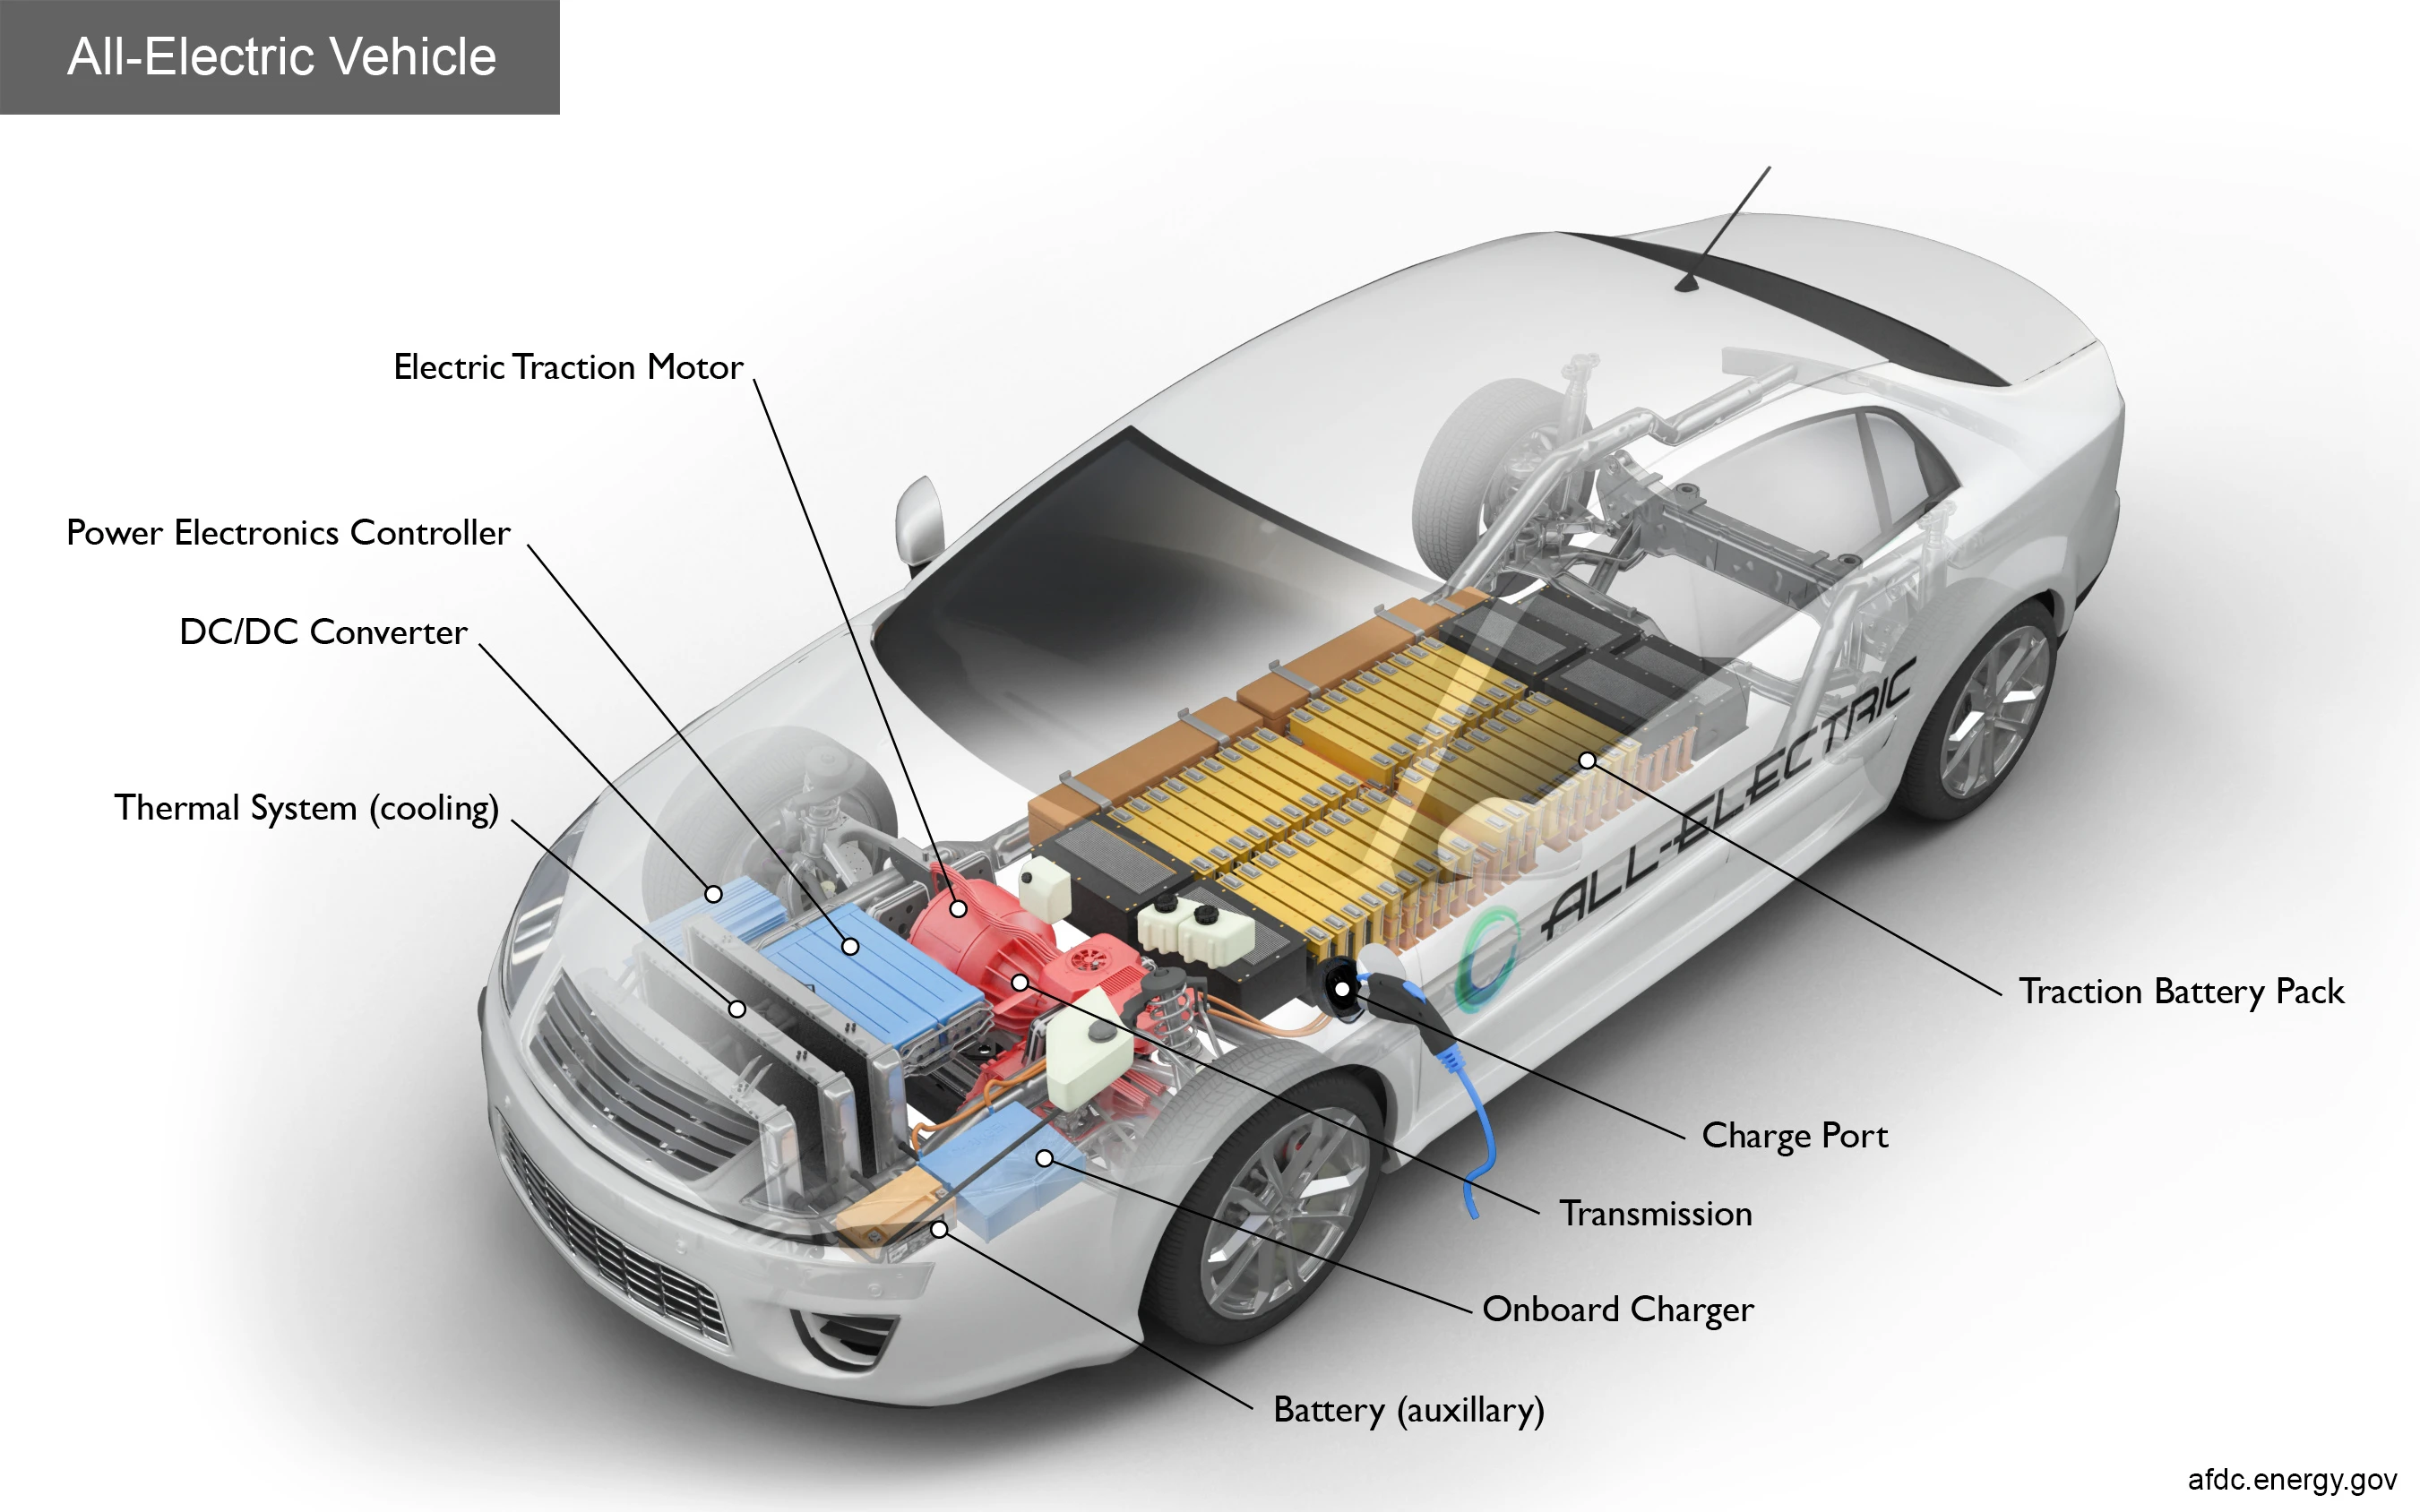 Can You Convert A Petrol Vehicle Into An Electric Vehicle?